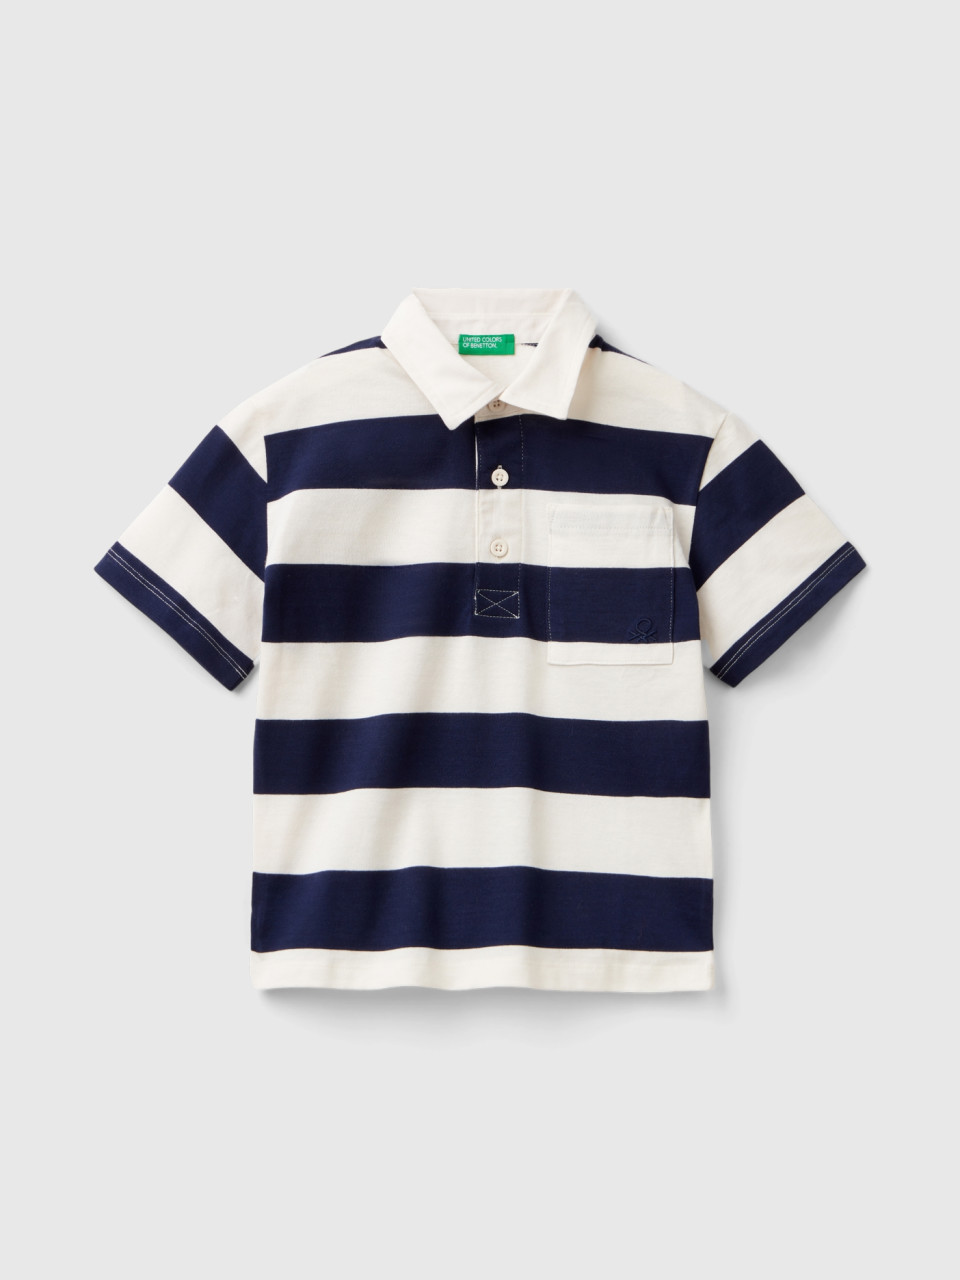 Benetton, Rugby Polo With Pocket, Dark Blue, Kids